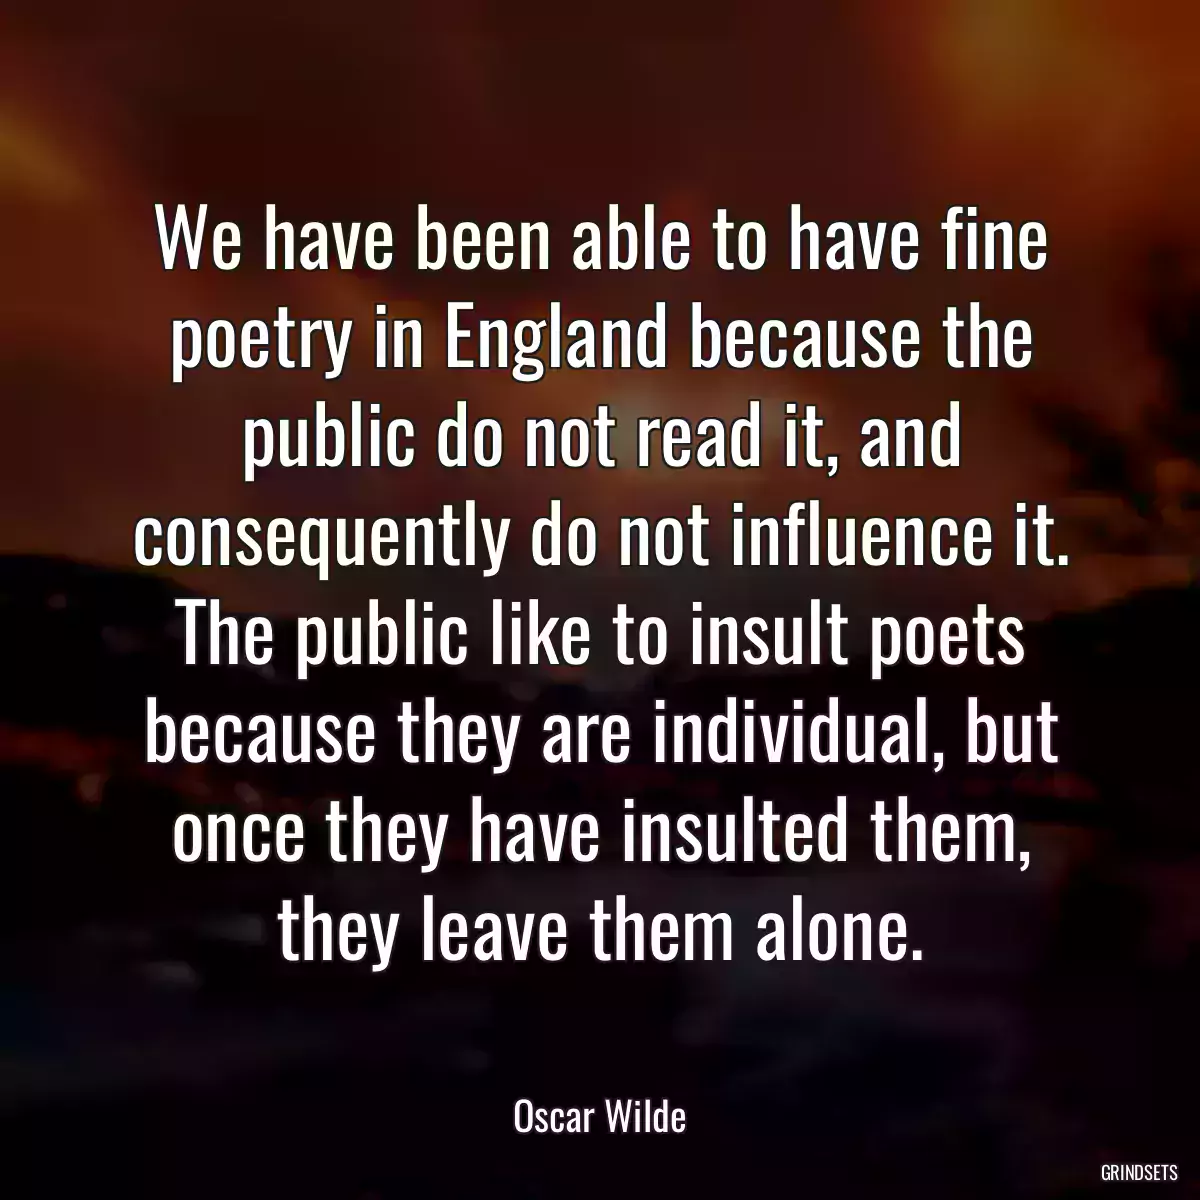 We have been able to have fine poetry in England because the public do not read it, and consequently do not influence it. The public like to insult poets because they are individual, but once they have insulted them, they leave them alone.